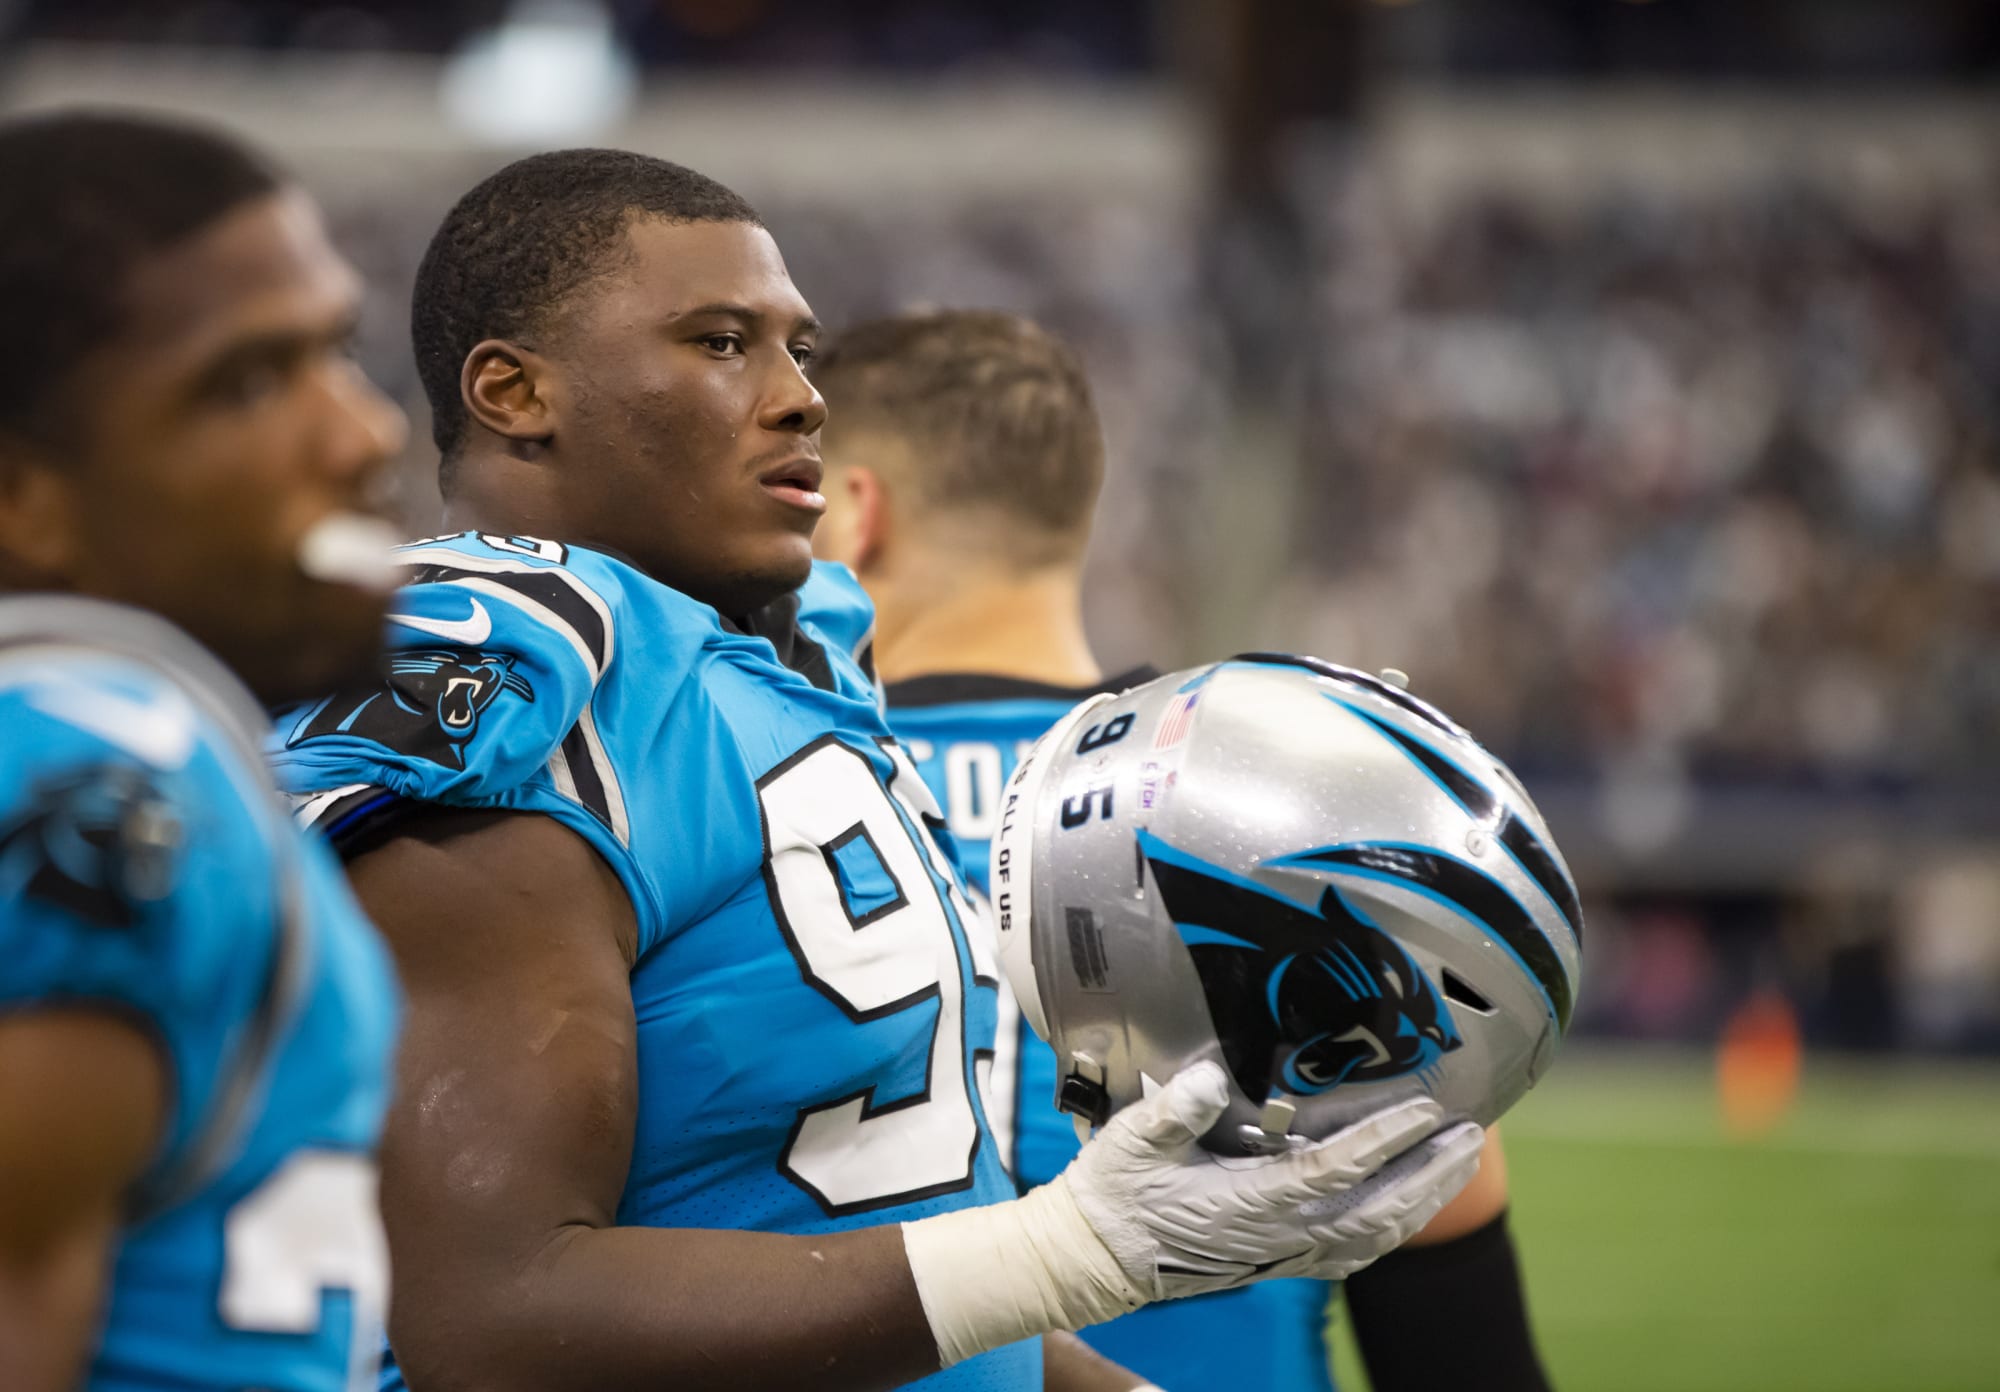 4 burning questions Carolina Panthers fans are asking ahead of Week 1